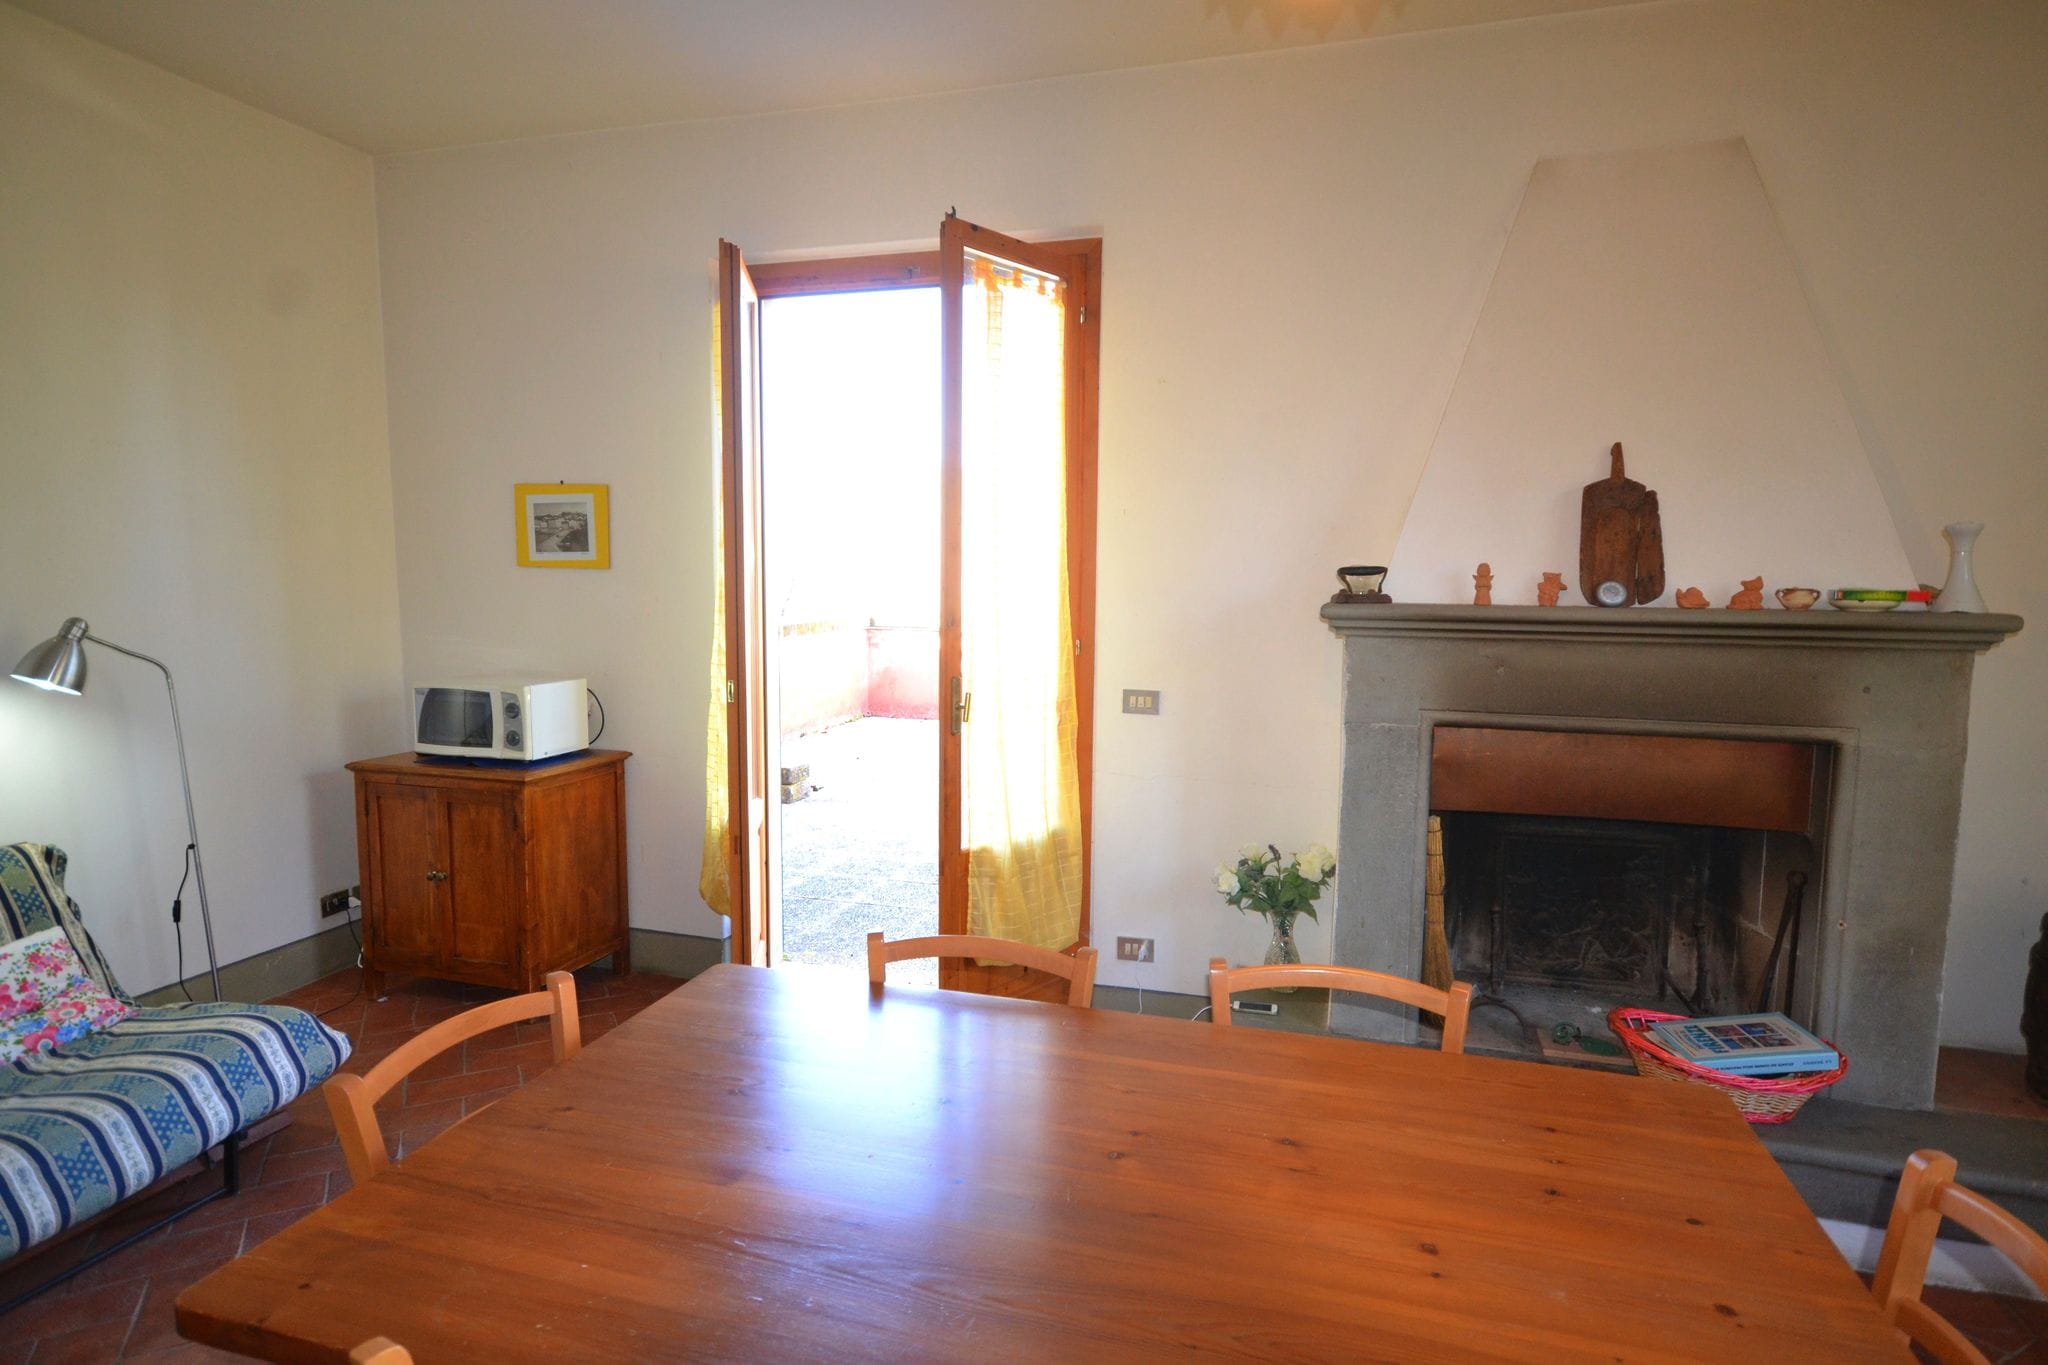 Semi-detached house in traditional agriturismo with clear view of the Chianti